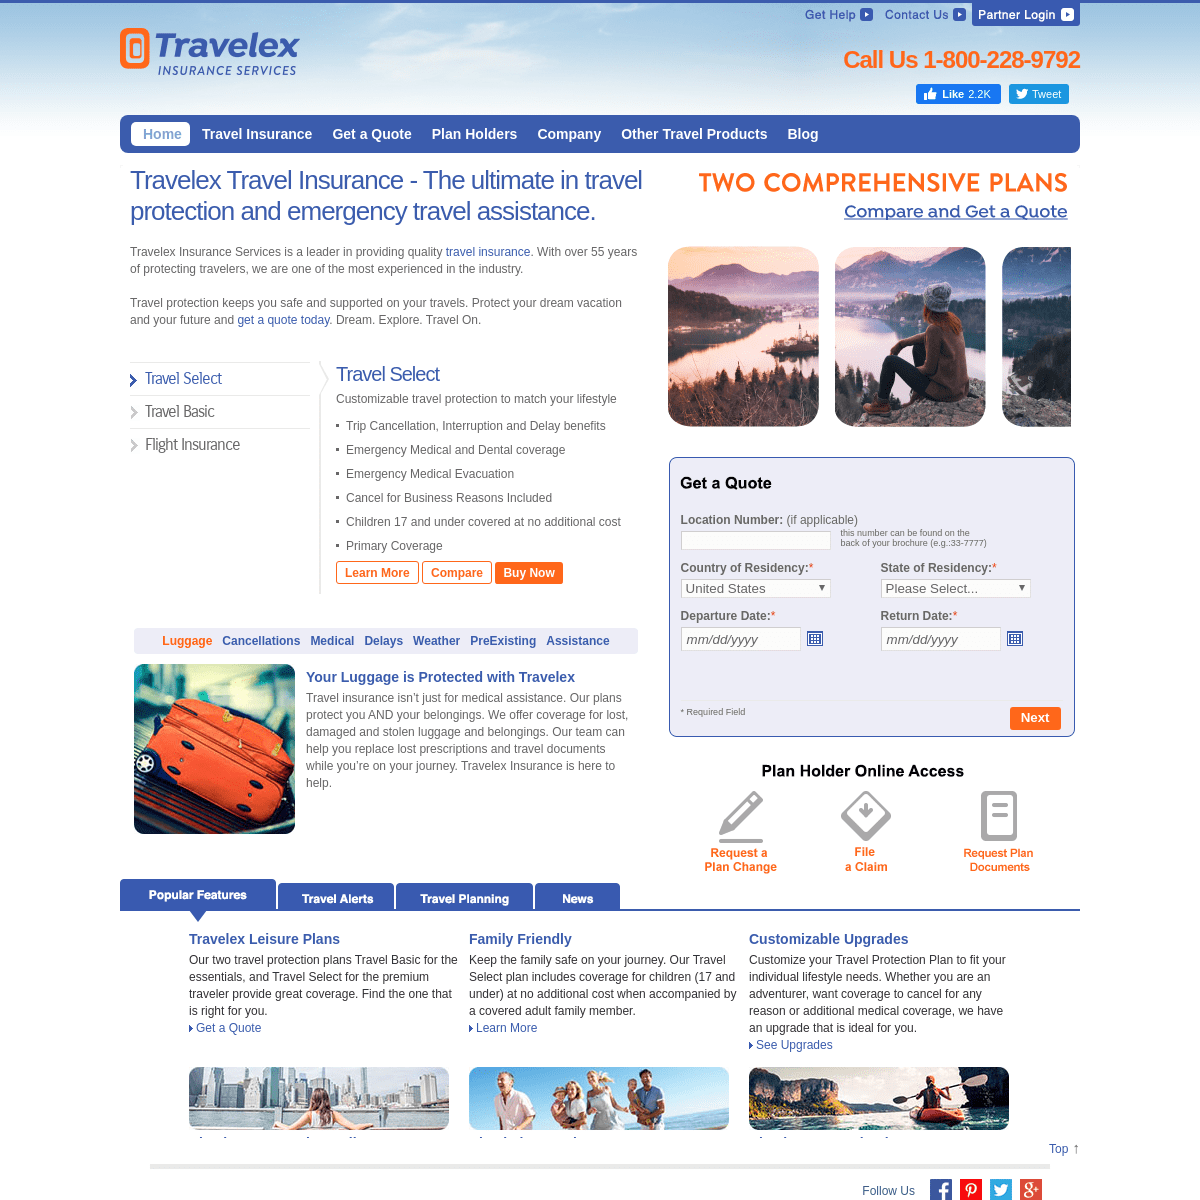 A complete backup of travelexinsurance.com